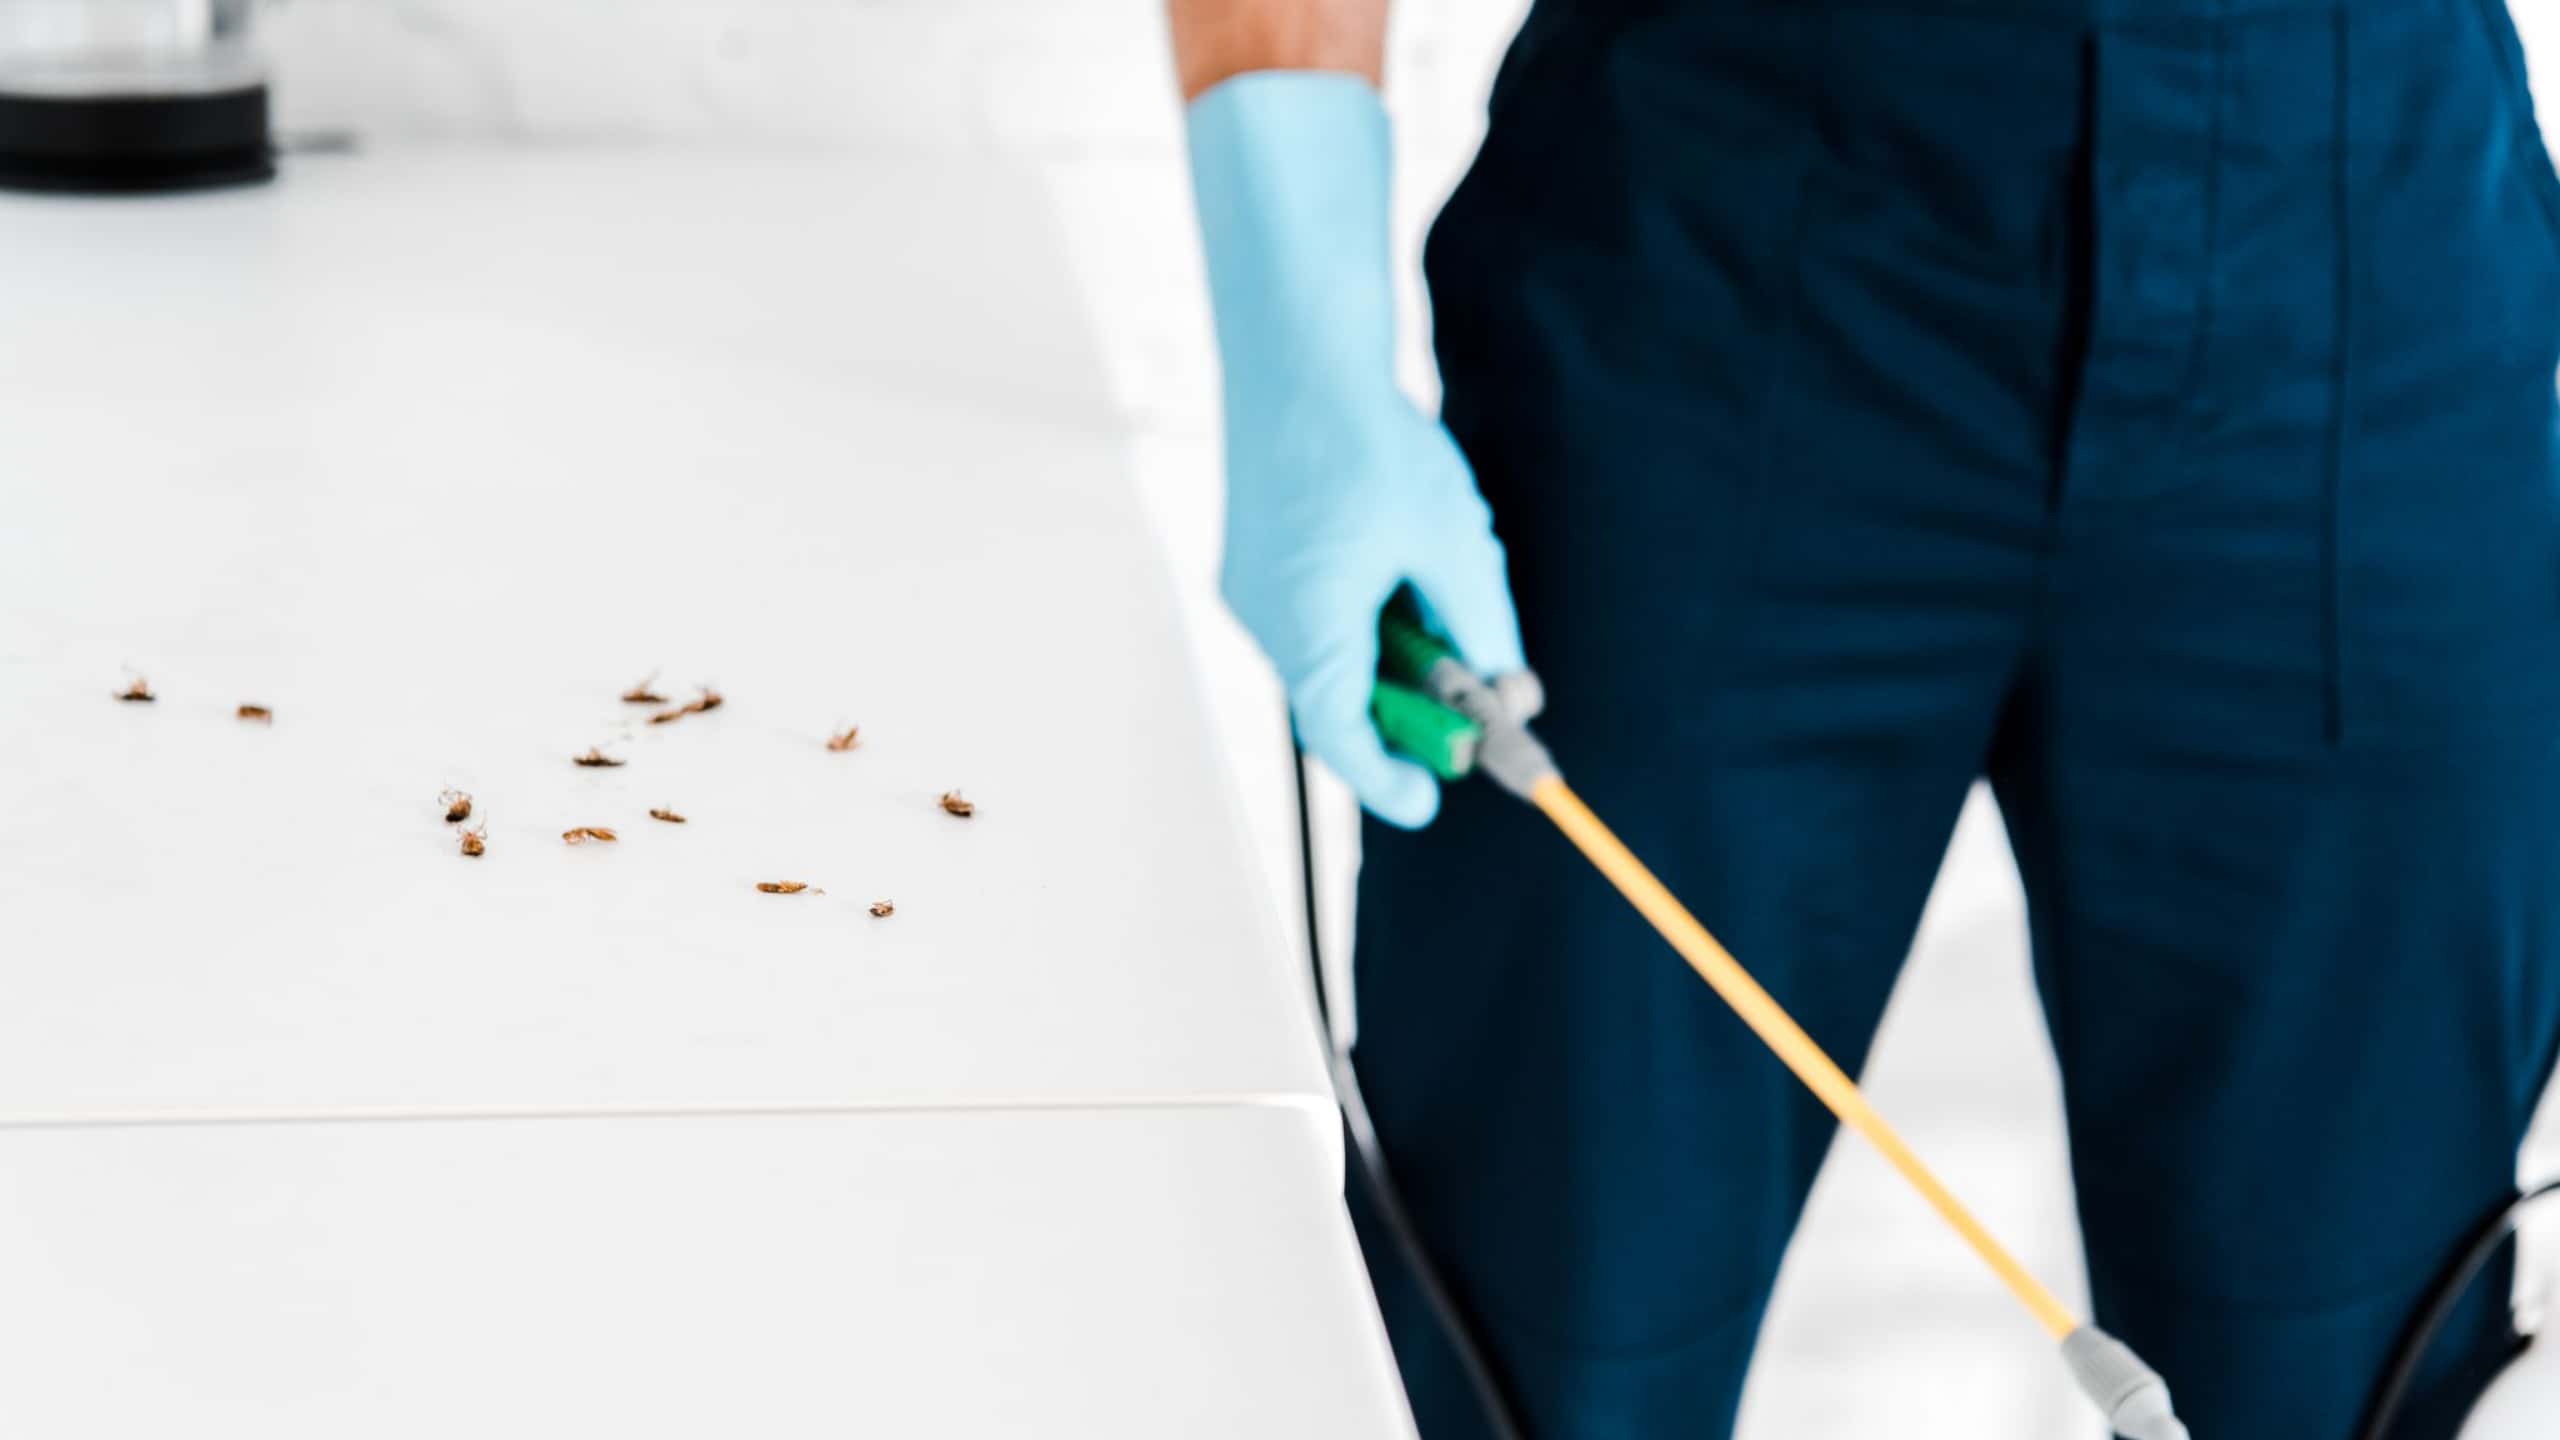 How to Protect Your Home from Insects and Rodents